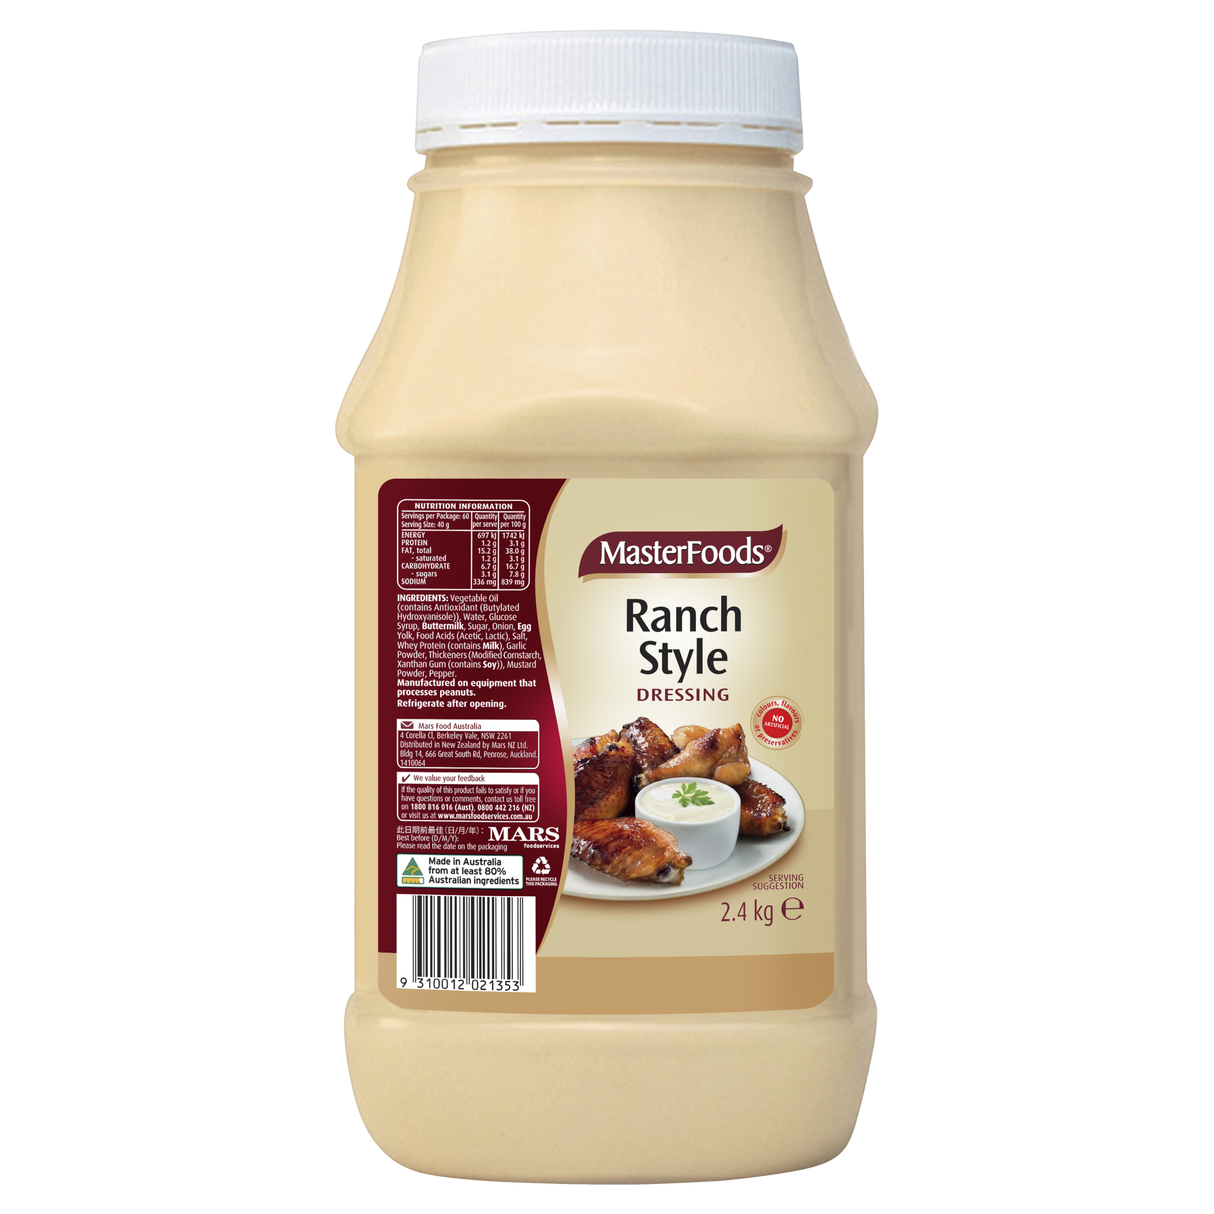 MasterFoods Ranch Dressing 2.4kg